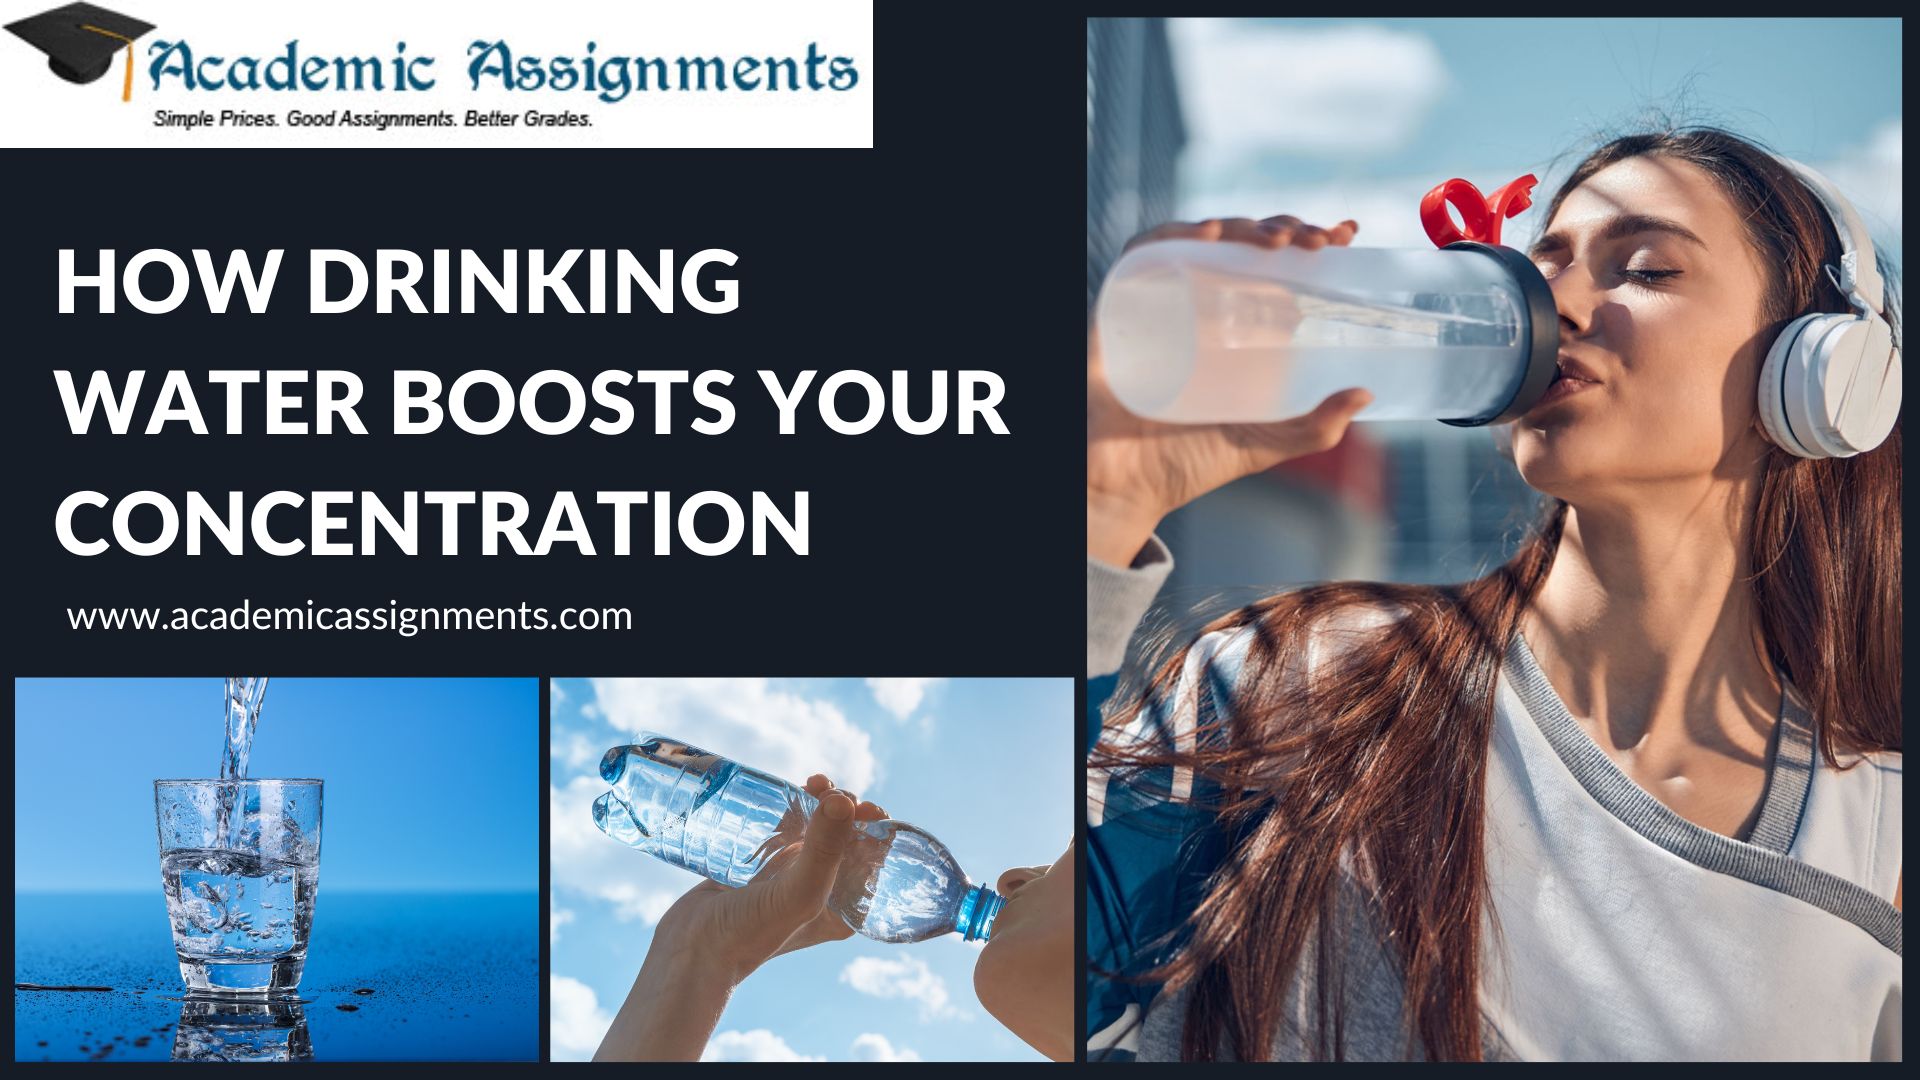 How drinking water boosts your concentration